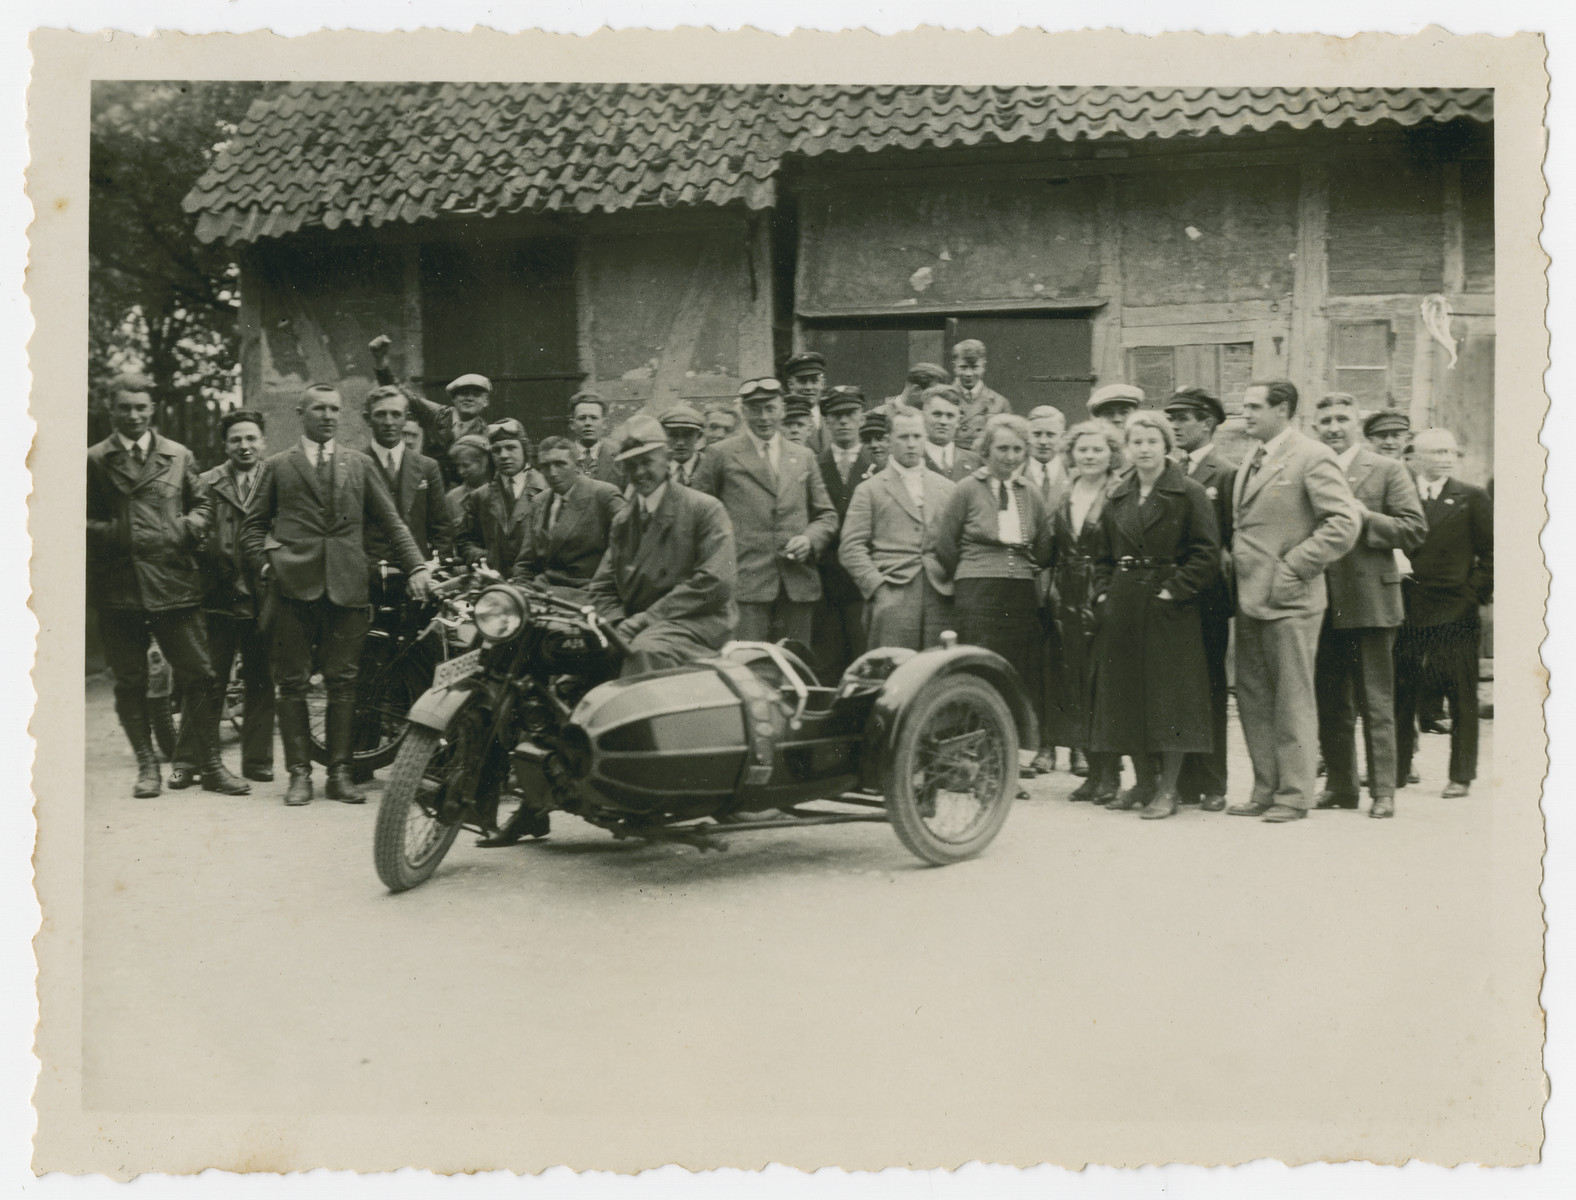 Group portrait of members of a motorcycle club,

The original caption "Fox Hunt" refers to the orienteering game played by members of the club.  Walter Kleeblatt is pictured second from the left.  One of the members (back left) raises a fist in the communist "Red Front" greeting.